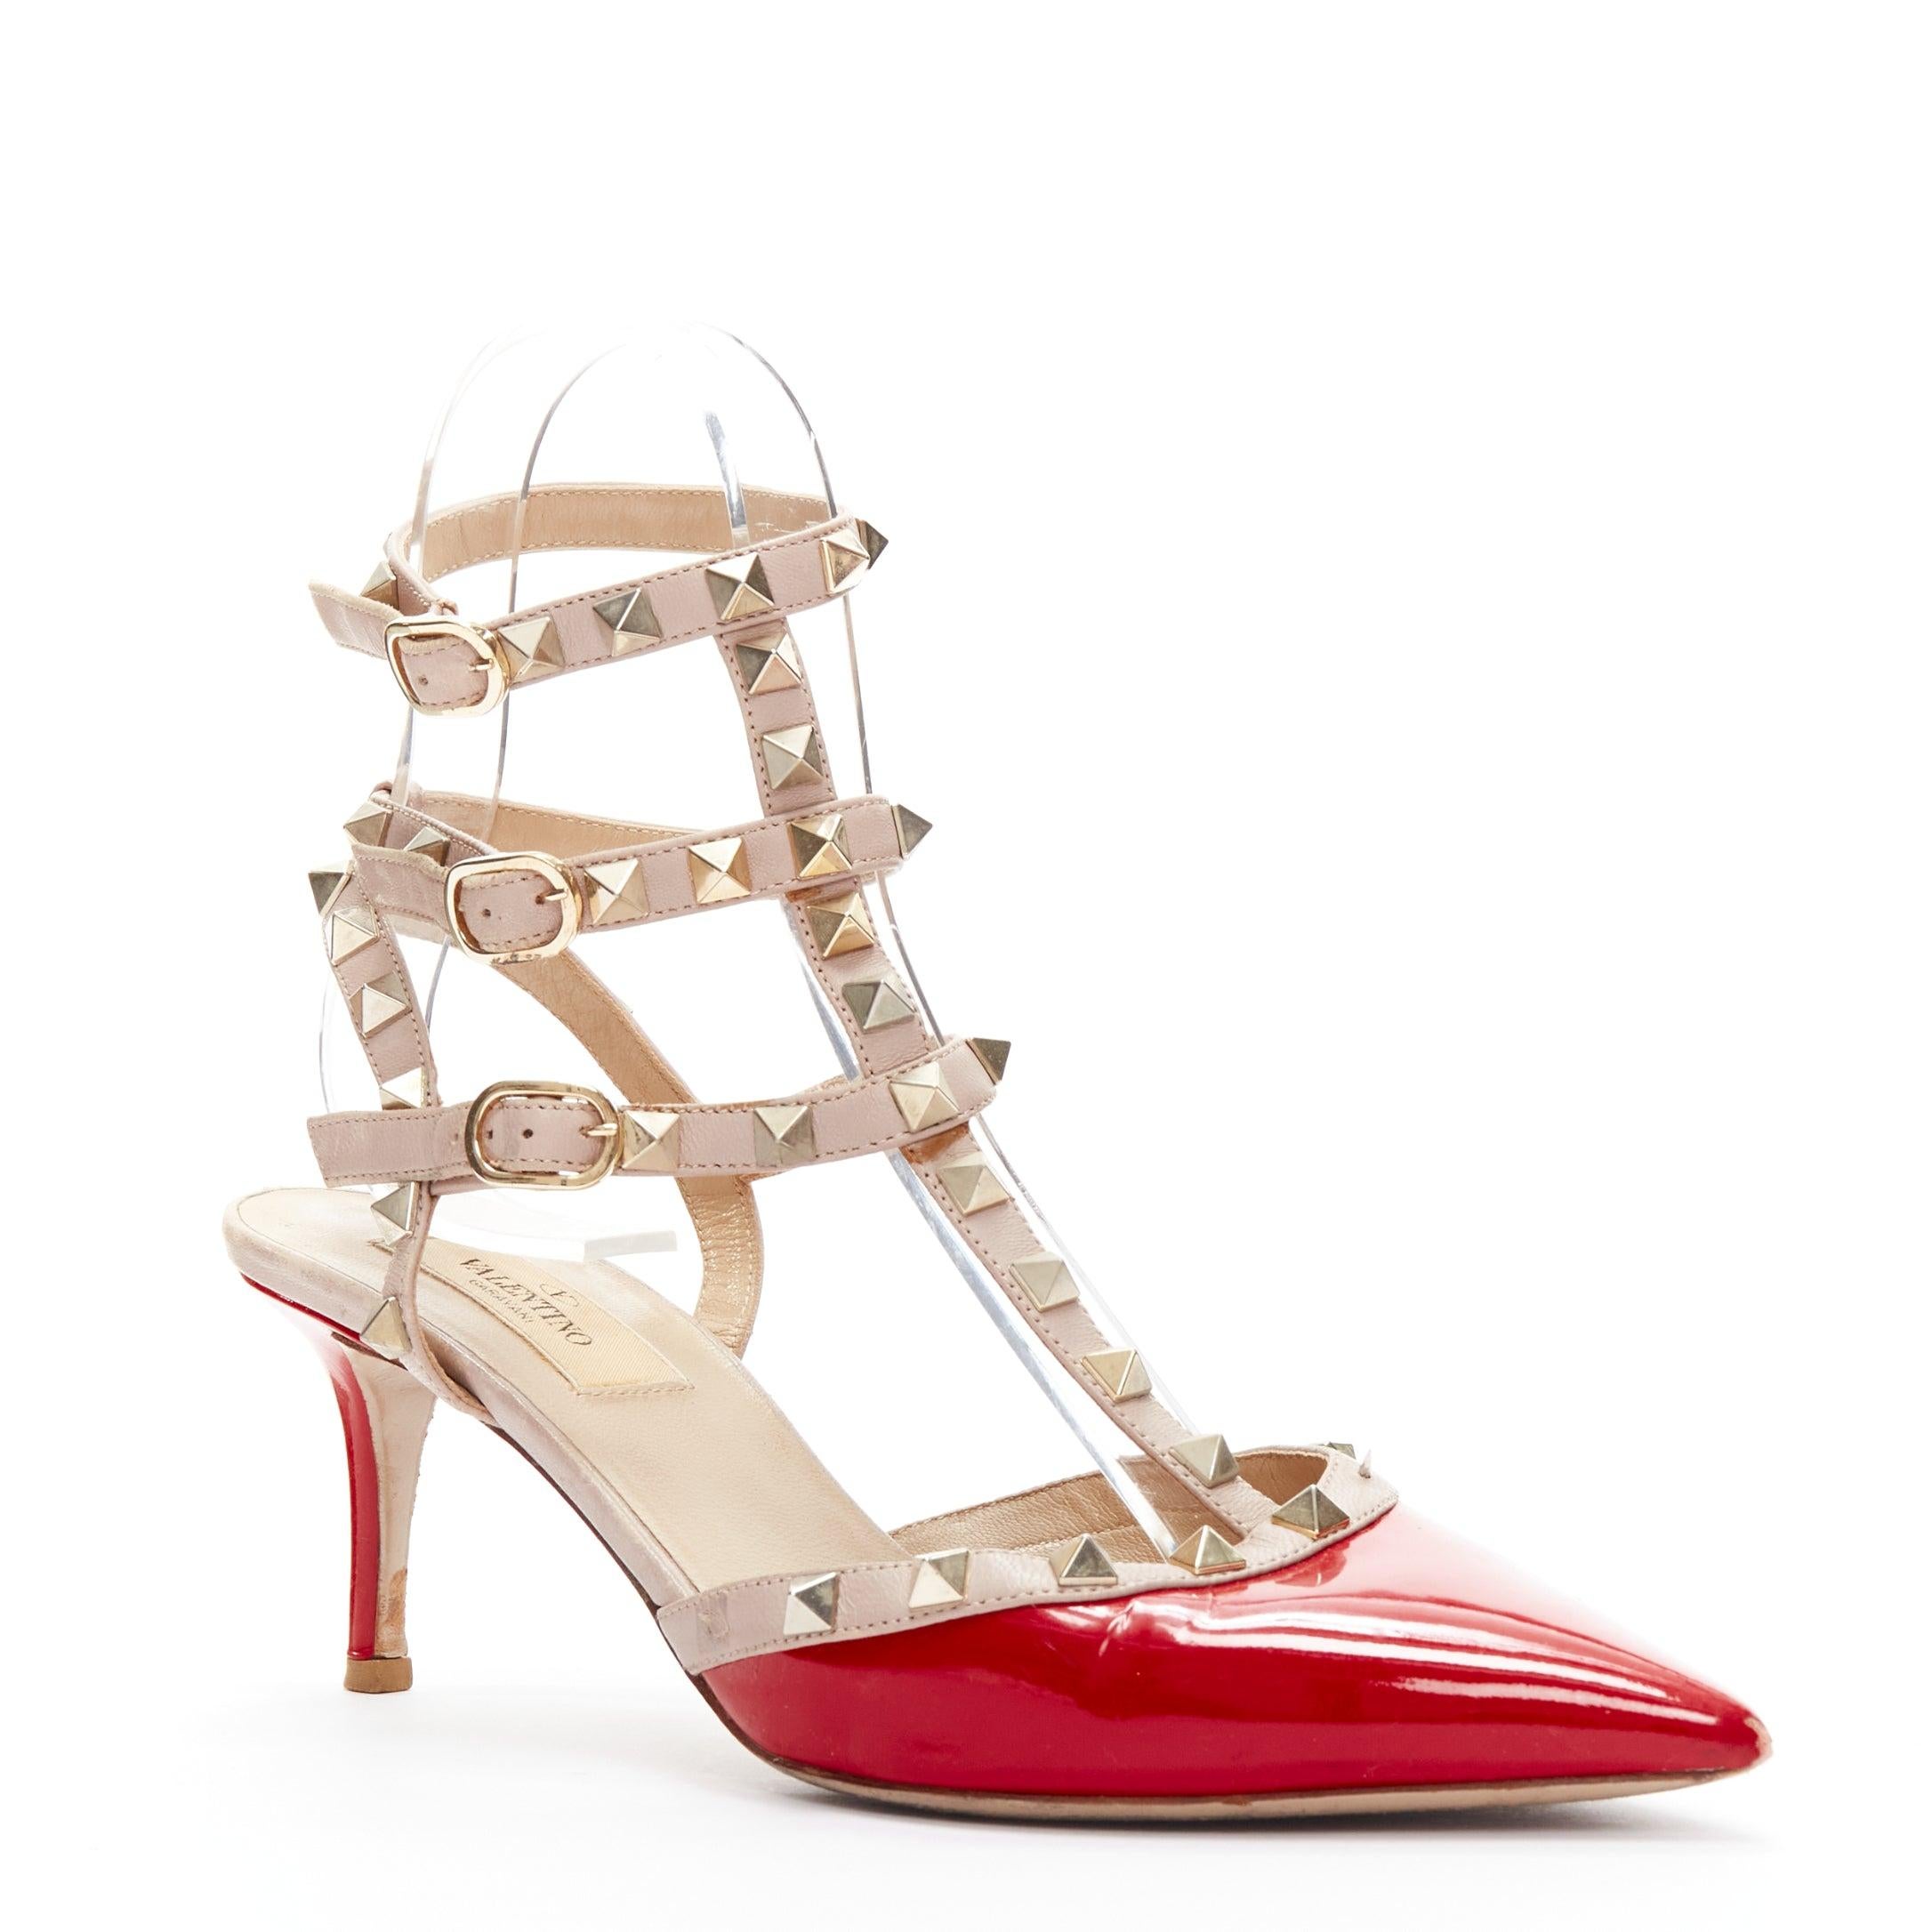 VALENTINO Rockstud red patent leather gold stud caged pump EU38
Reference: CNPG/A00042
Brand: Valentino
Model: Rockstud
Material: Leather
Color: Red, Nude
Pattern: Solid
Closure: Ankle Strap
Lining: Nude Leather
Made in: Italy

CONDITION:
Condition: